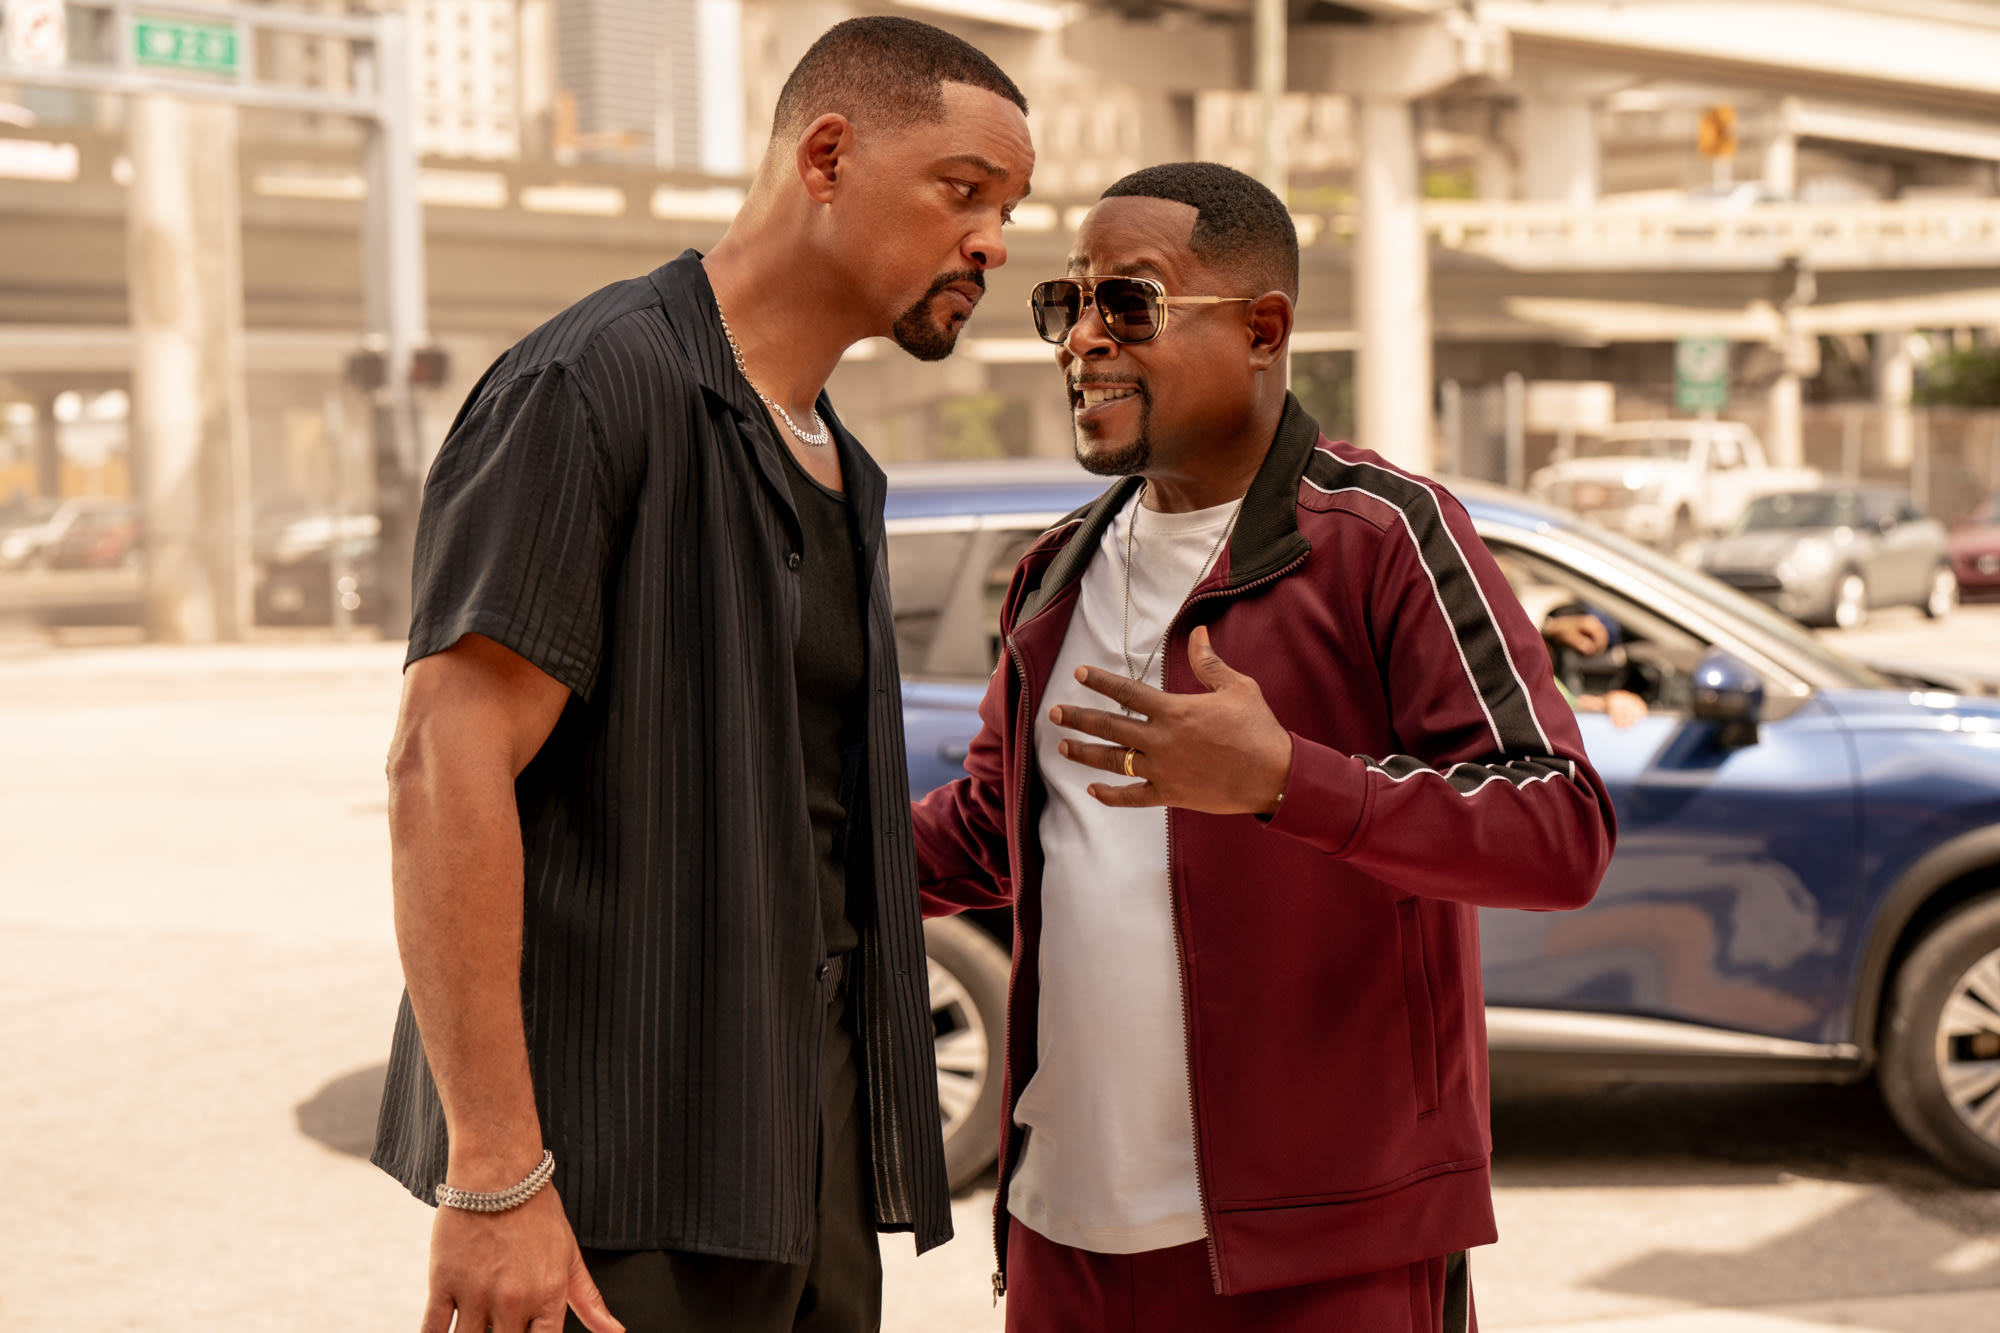 Martin Lawrence is 'healthy as hell': 'Bad Boys' star quells fans' press tour concerns